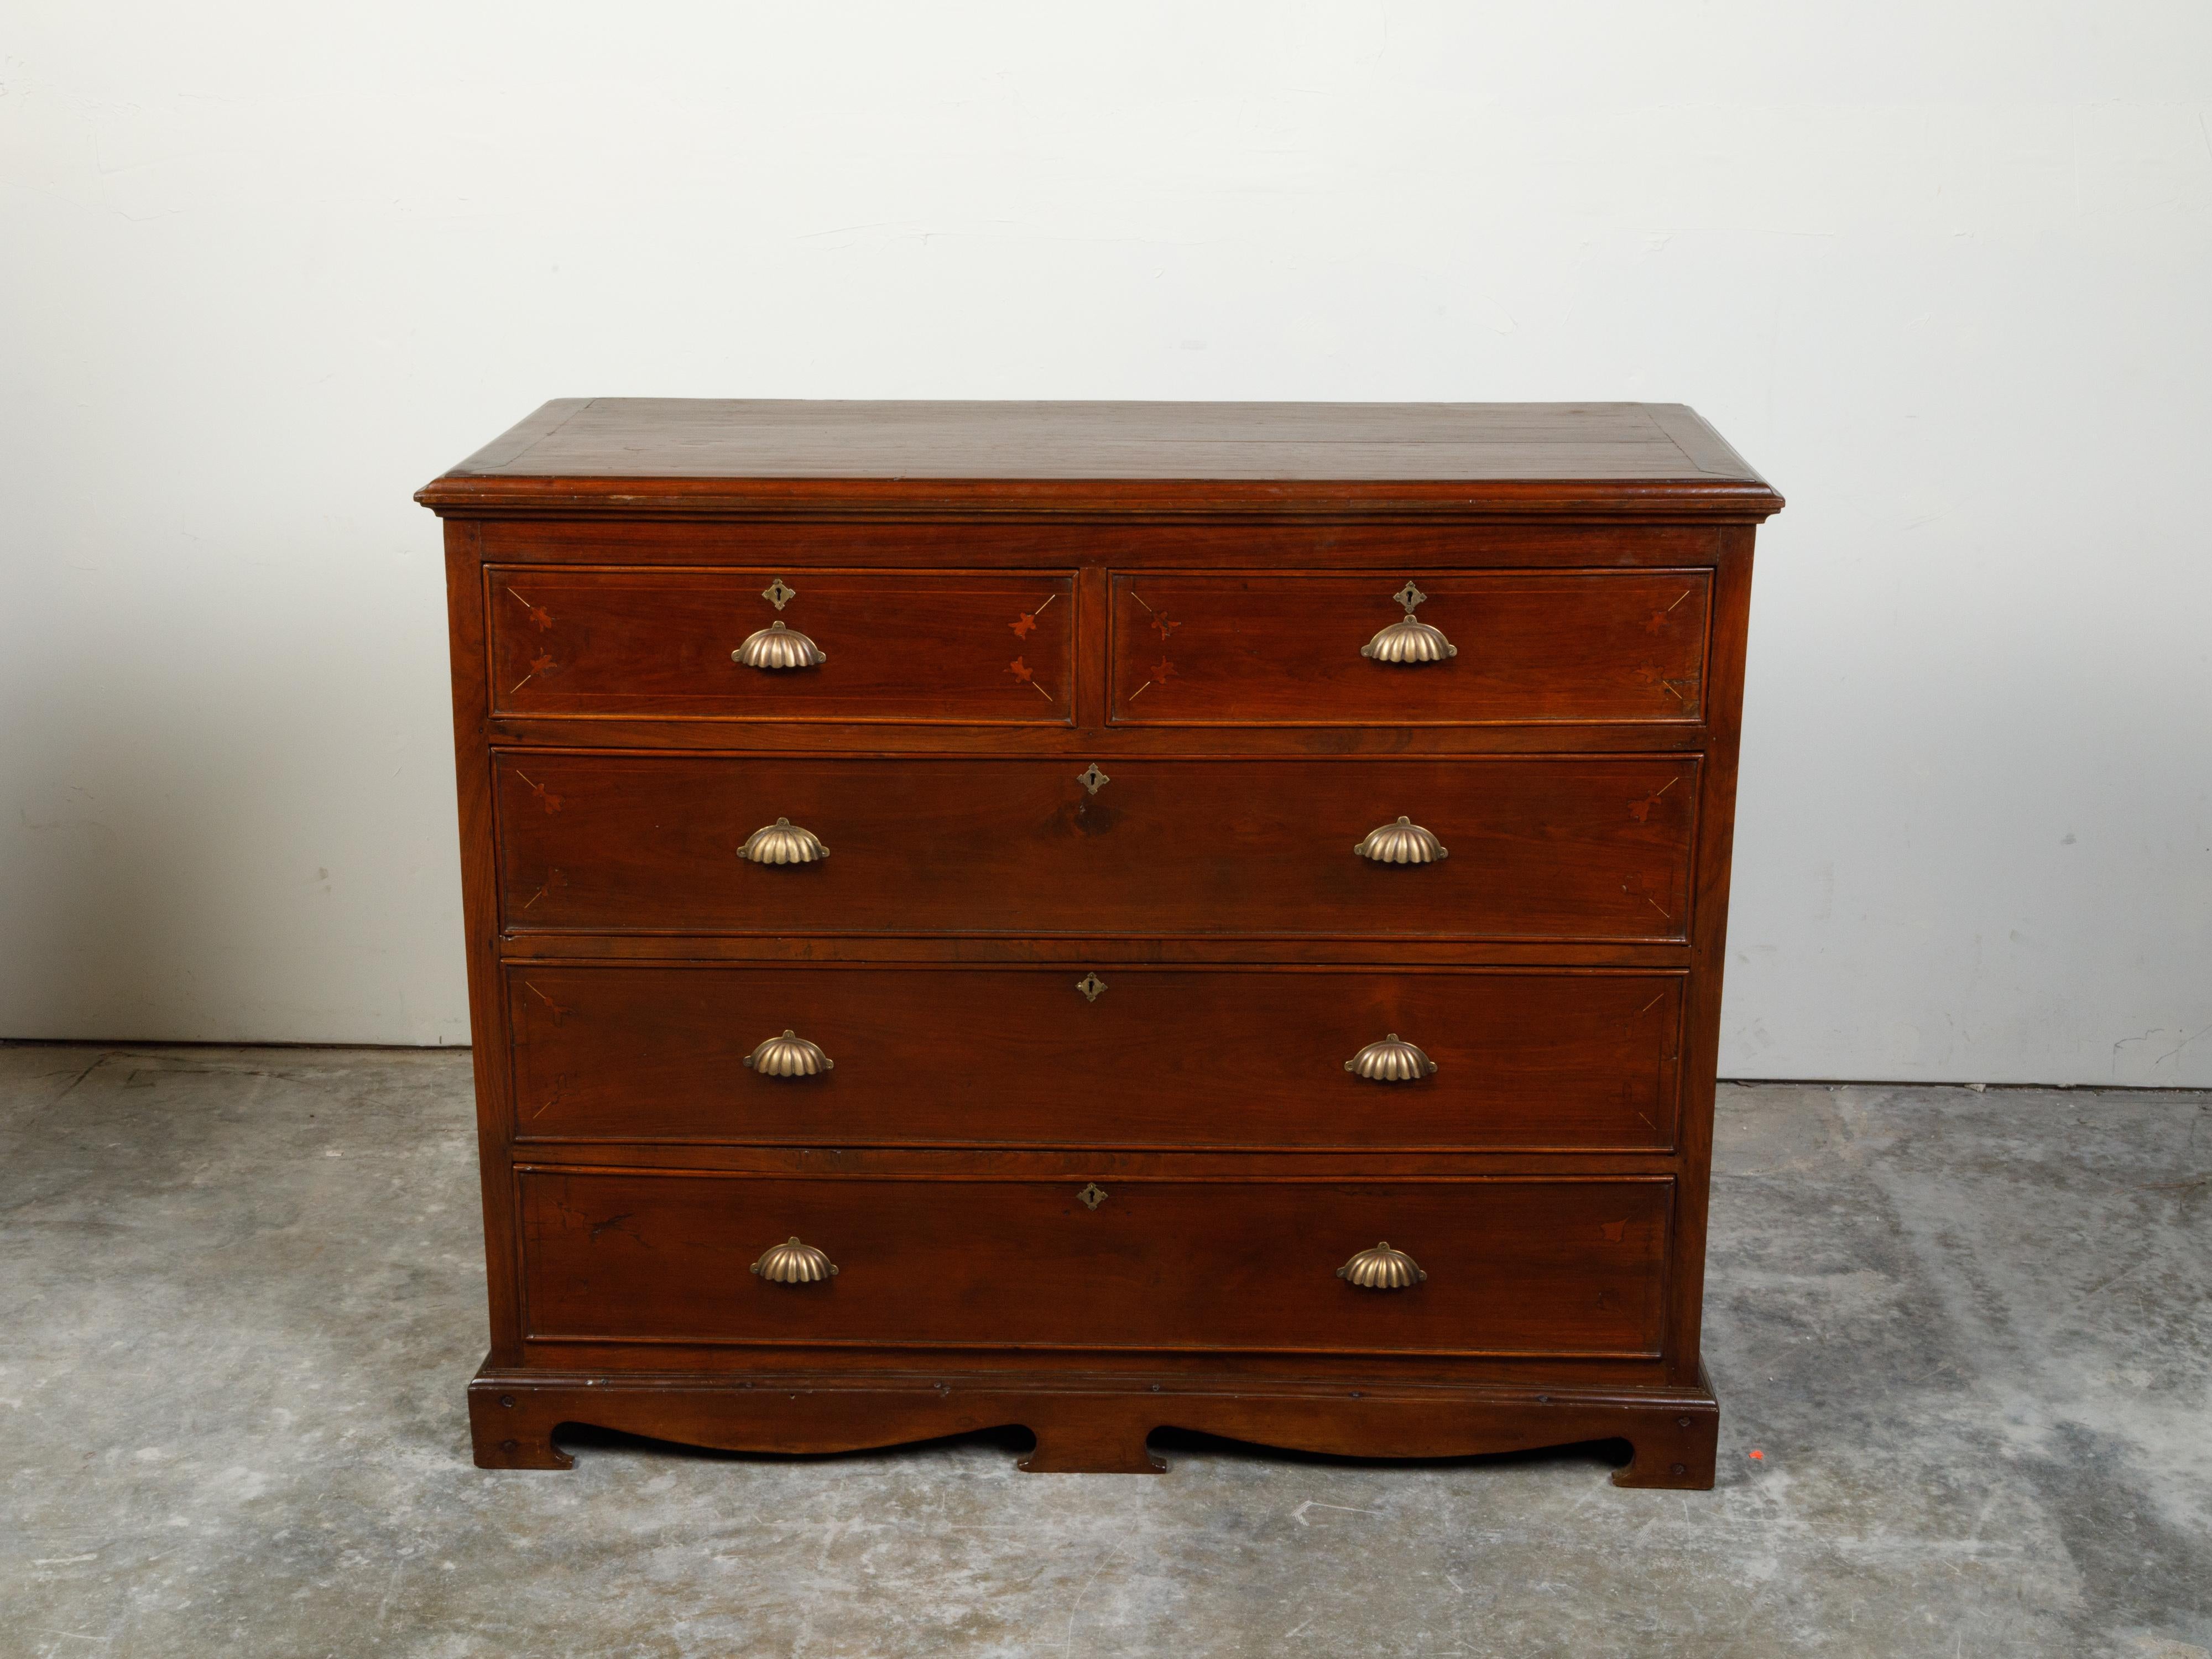 An Anglo-Indian period walnut commode from the 19th century, with five drawers, floral inlay and gadrooned hardware. Created during the 19th century, this walnut commode features a rectangular planked top sitting above two small drawers adorned with